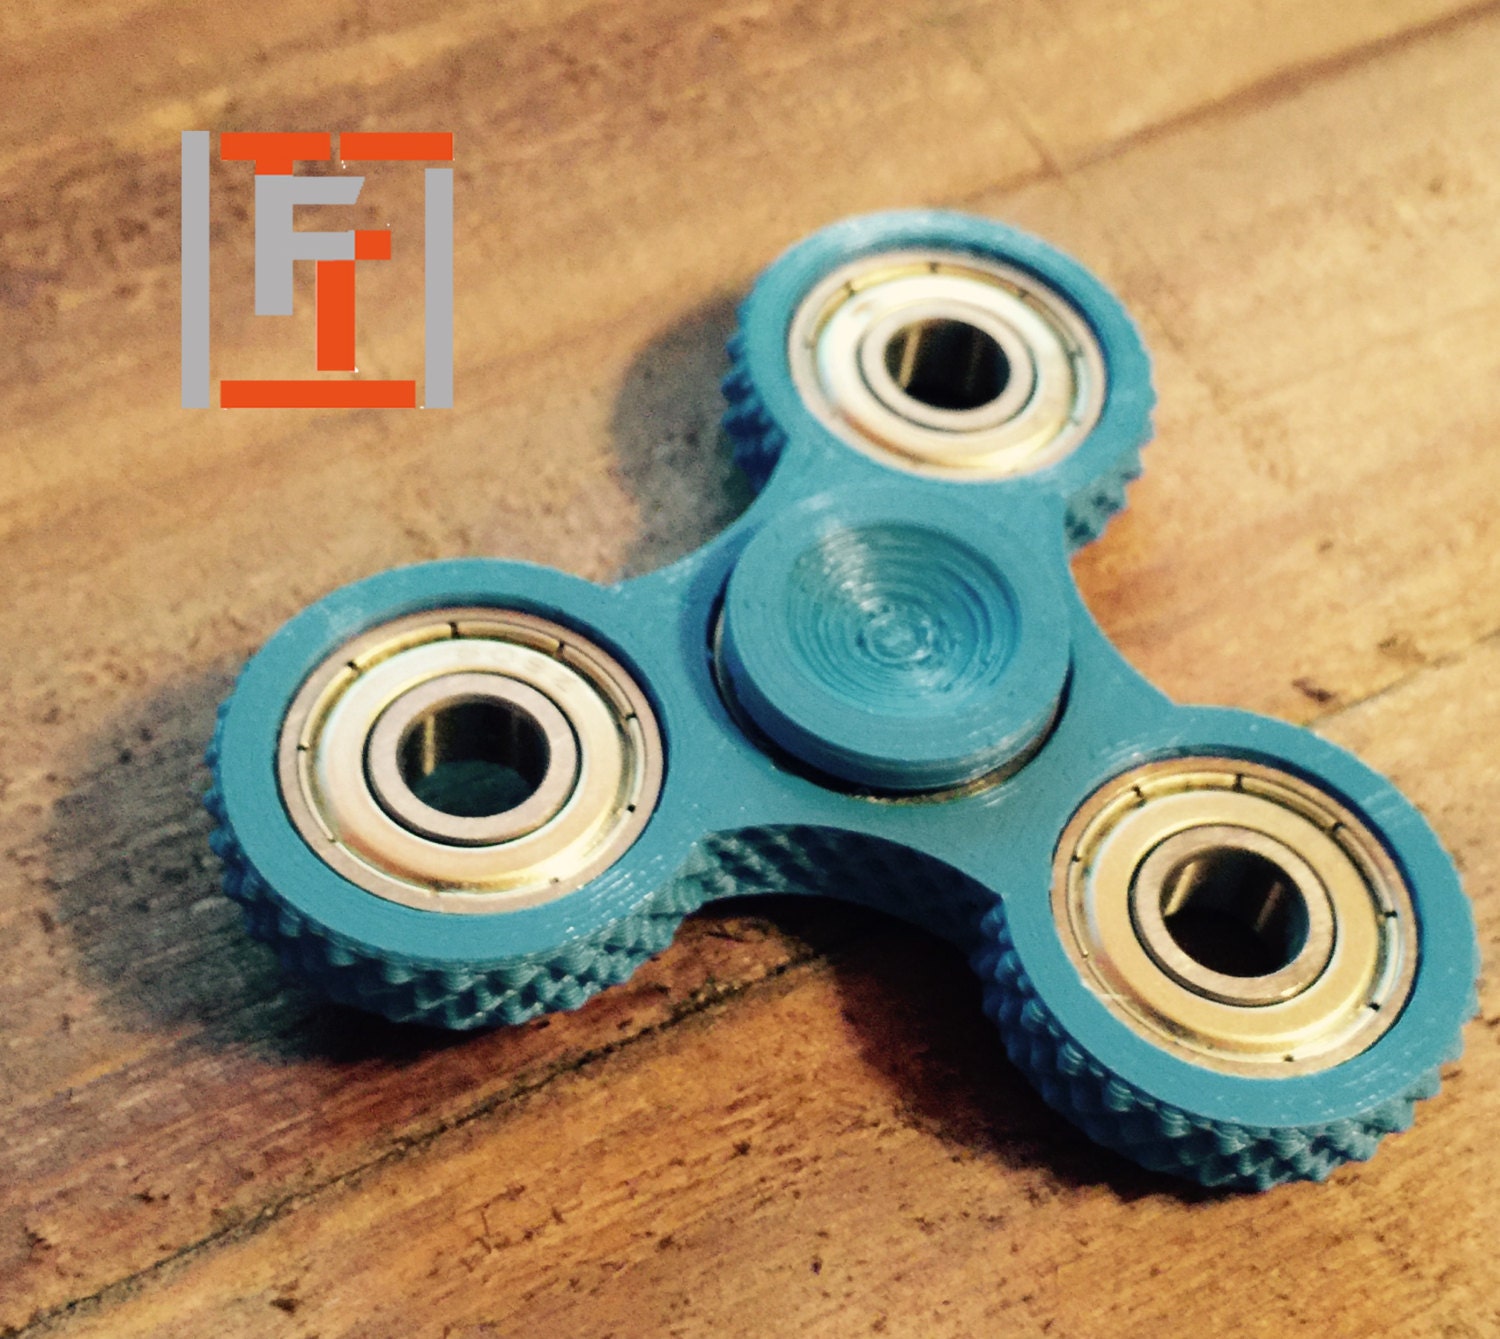 EDC Tri Axis Fidget Spinner Toy by ThingForgeTech on Etsy